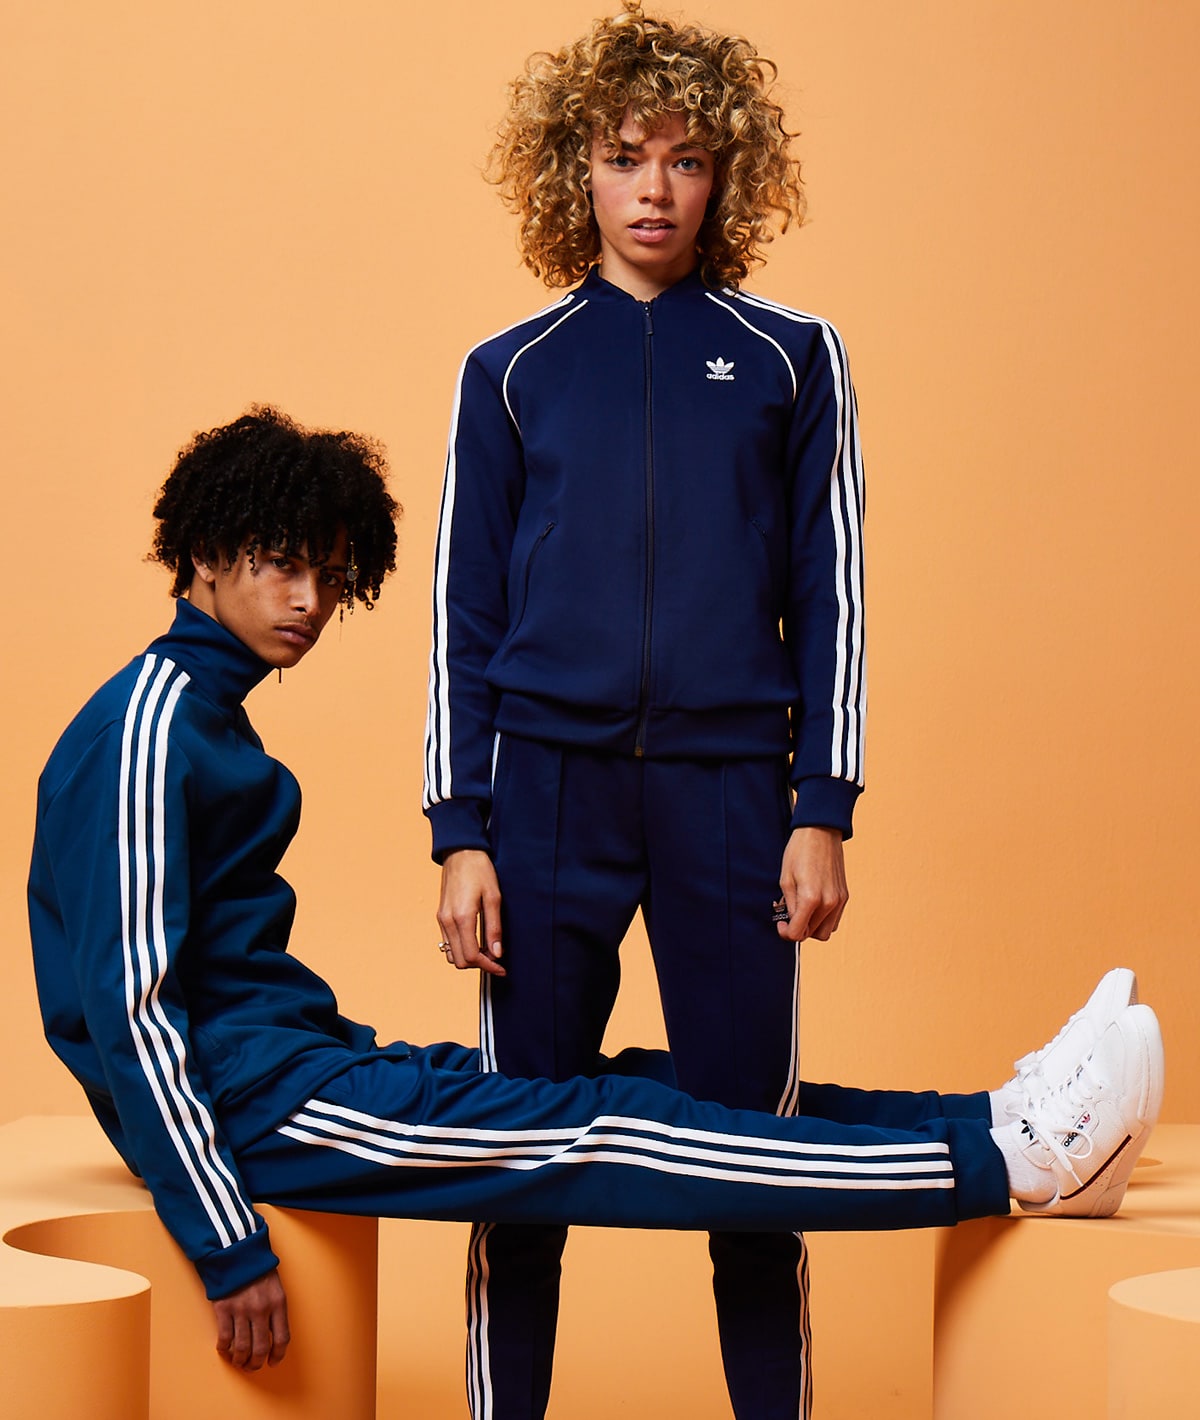 matching adidas outfits for mother and daughter